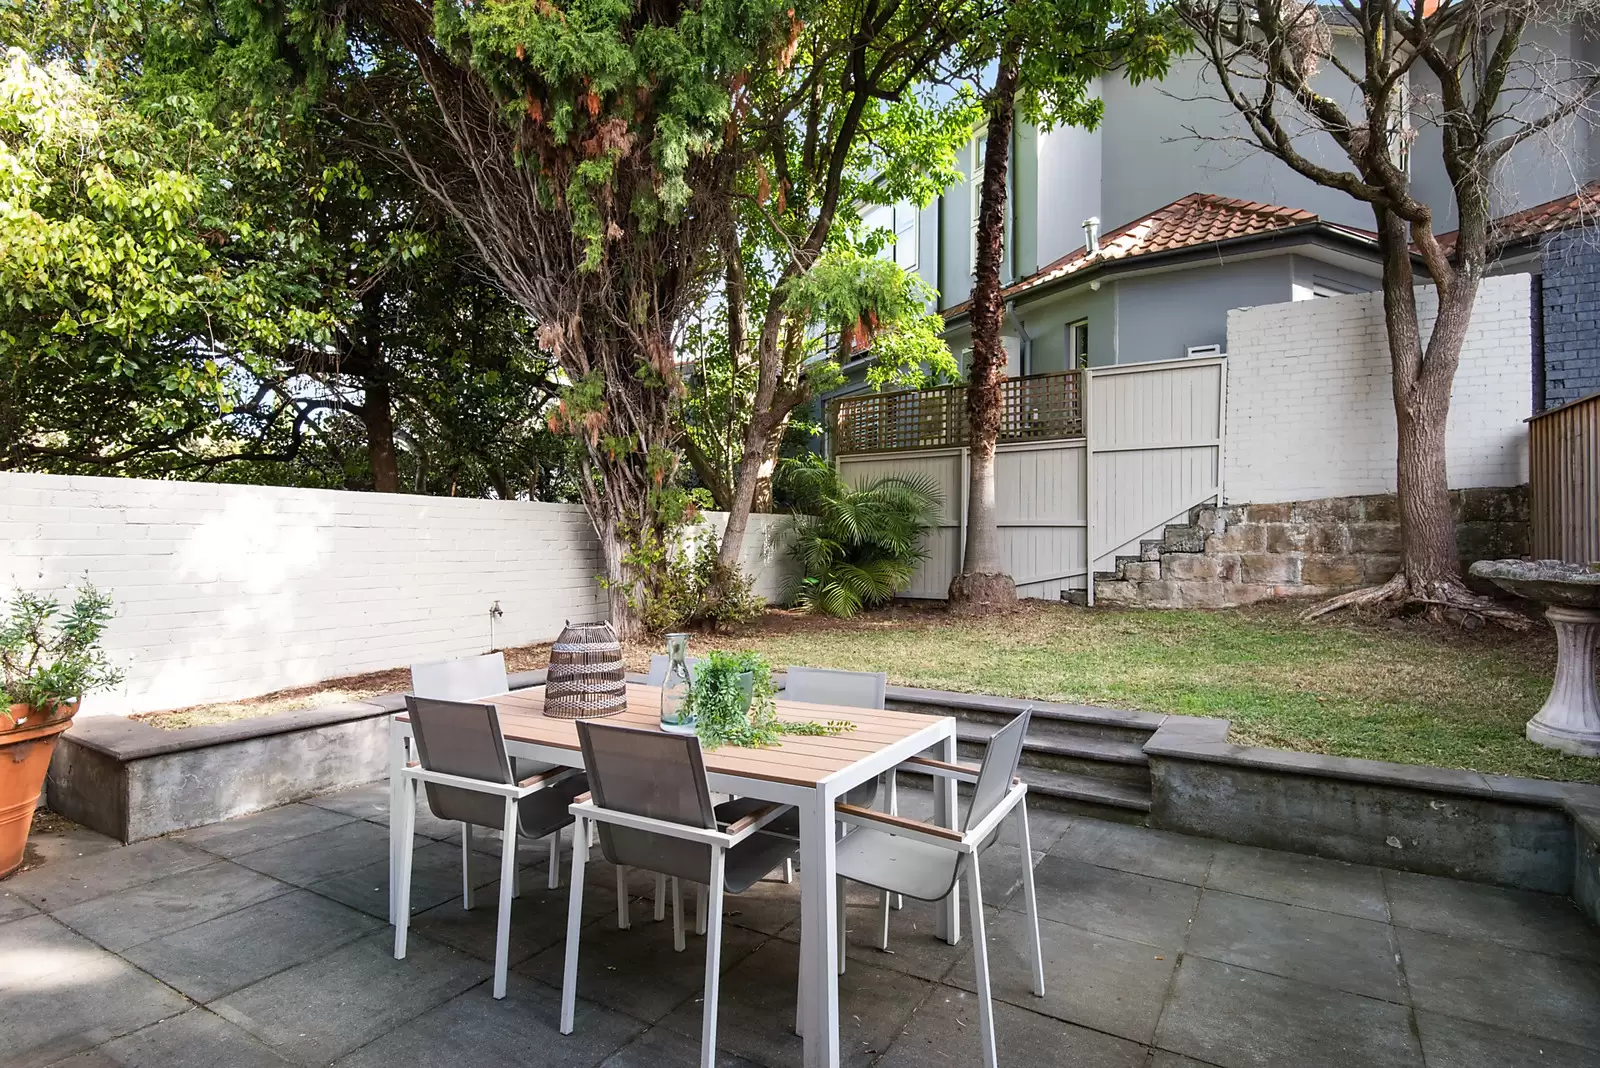 Photo #5: 15 Roslyndale Avenue, Woollahra - Sold by Sydney Sotheby's International Realty